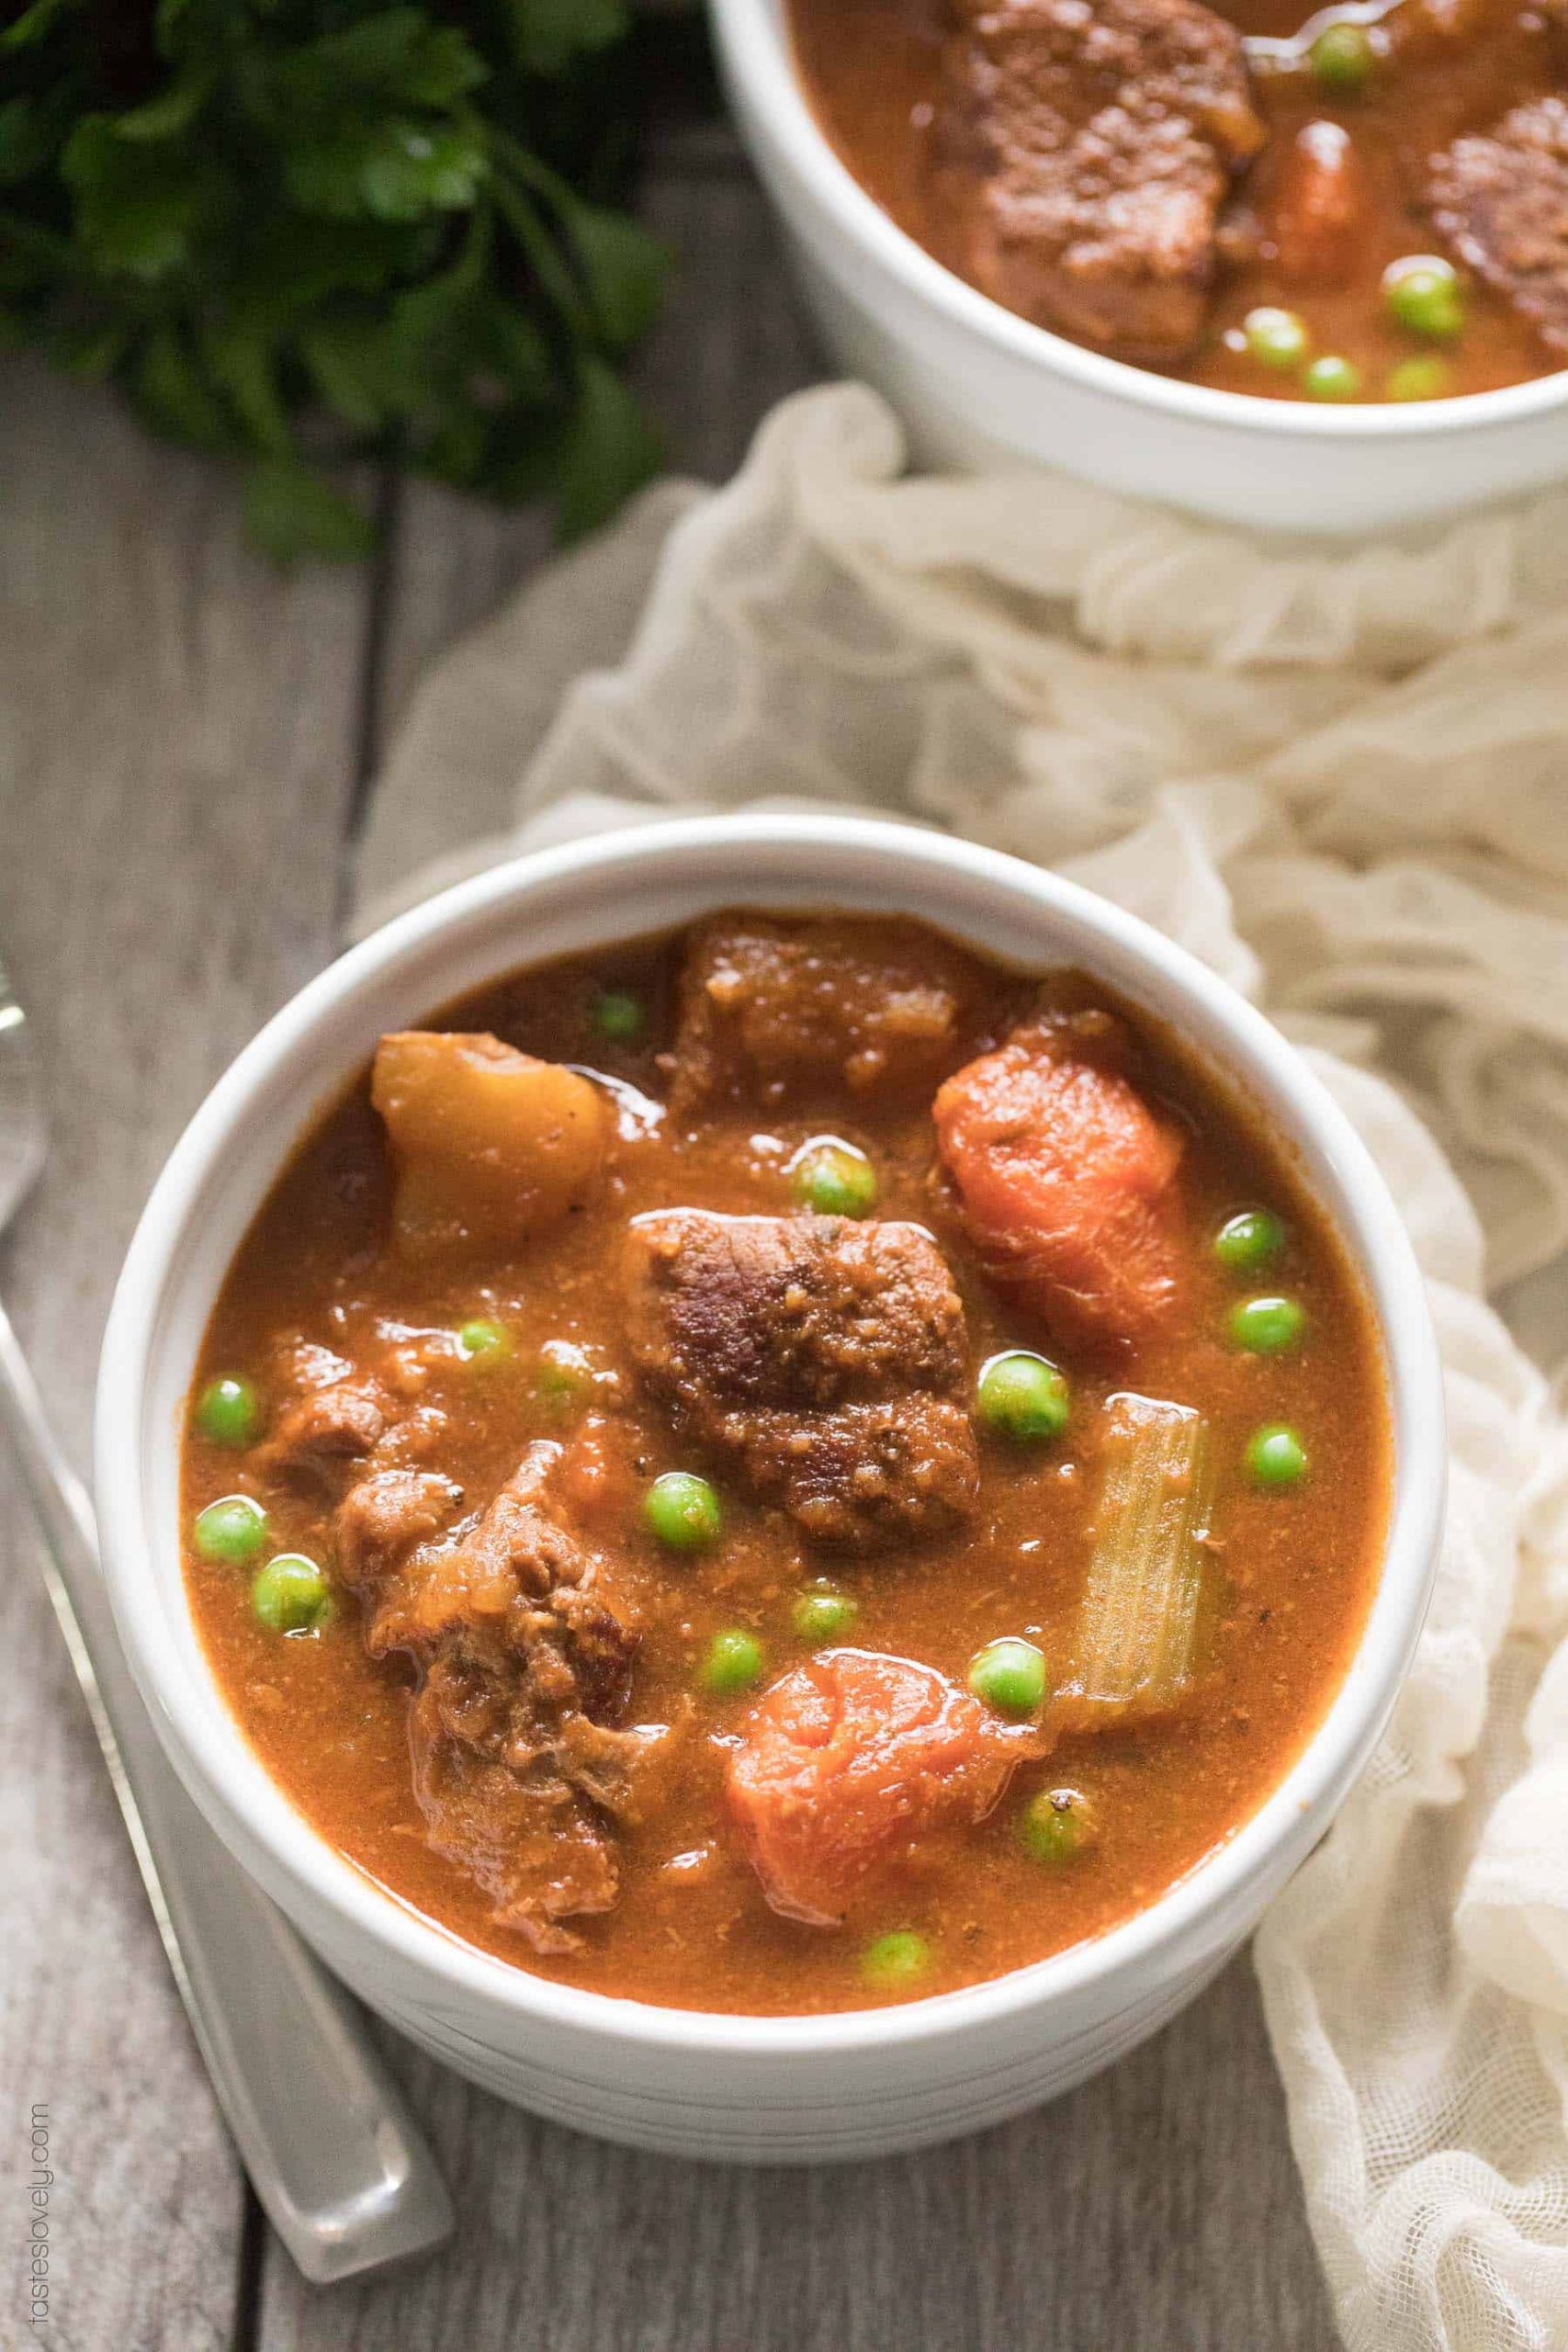 Beef Stew In Dutch Oven
 Paleo & Whole30 Beef Stew Slow Cooker or Dutch Oven